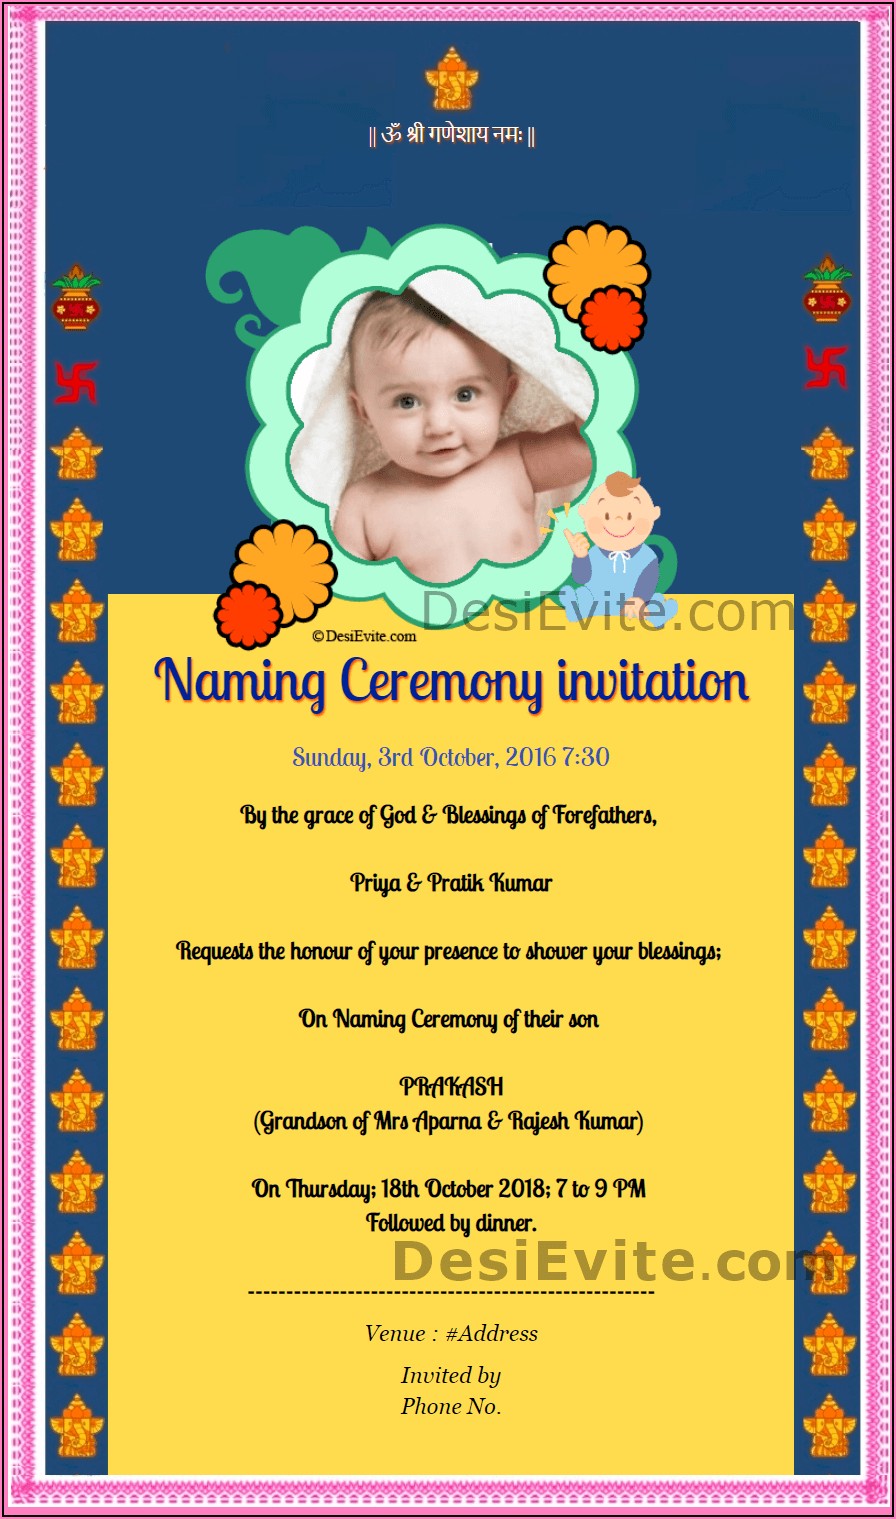 Naming Ceremony Invitation Card For Baby Girl Online